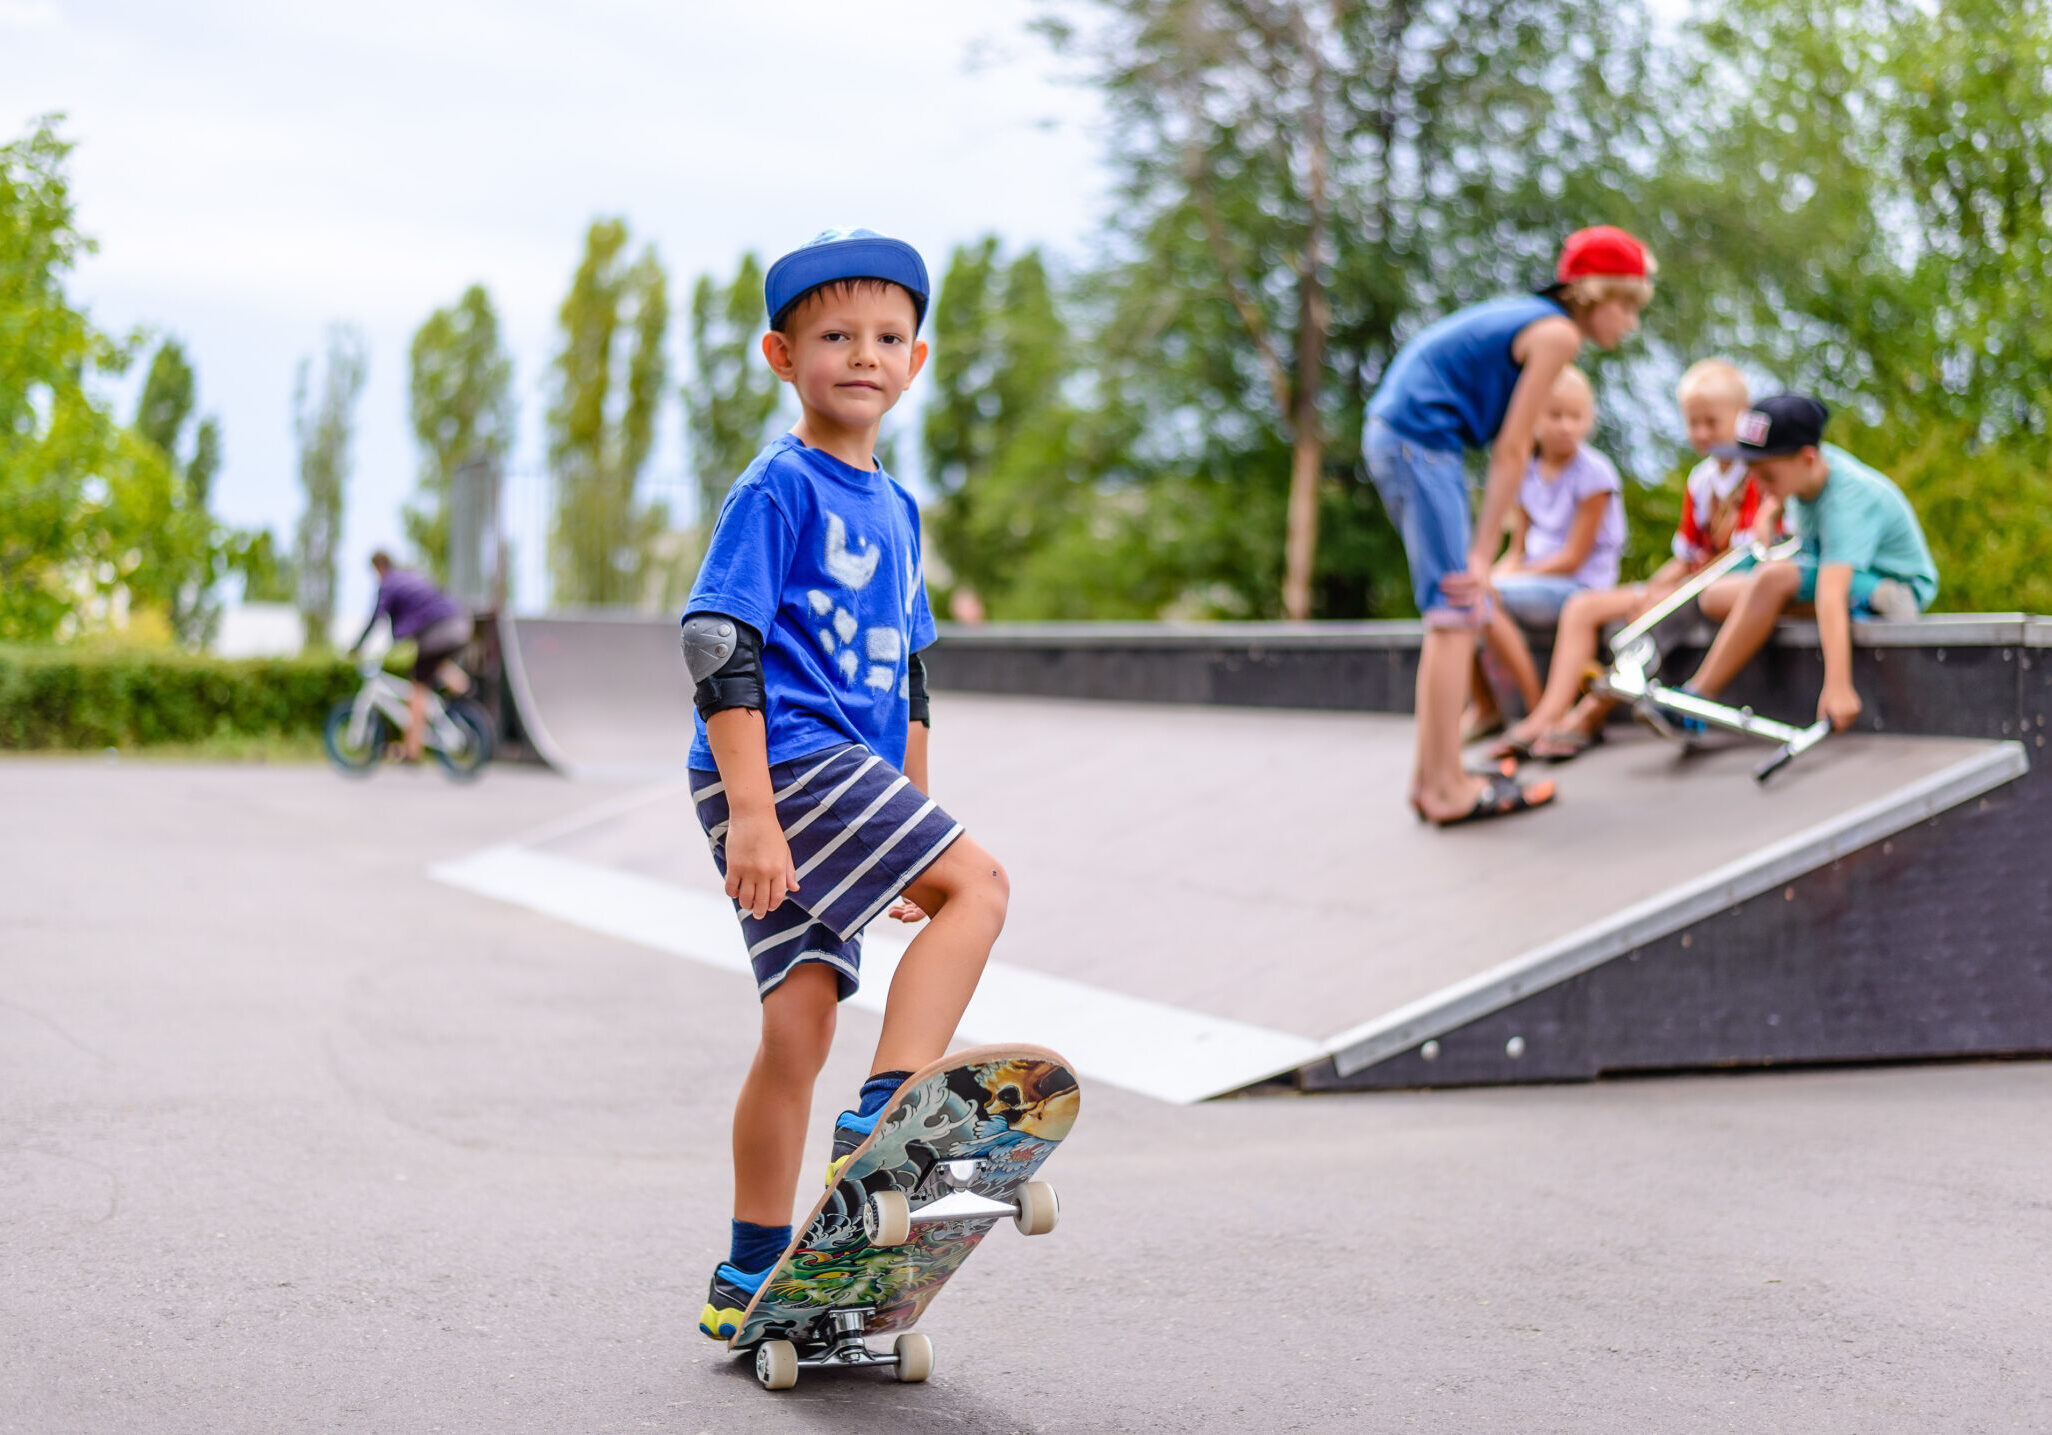 Young boy at a skate park with friends